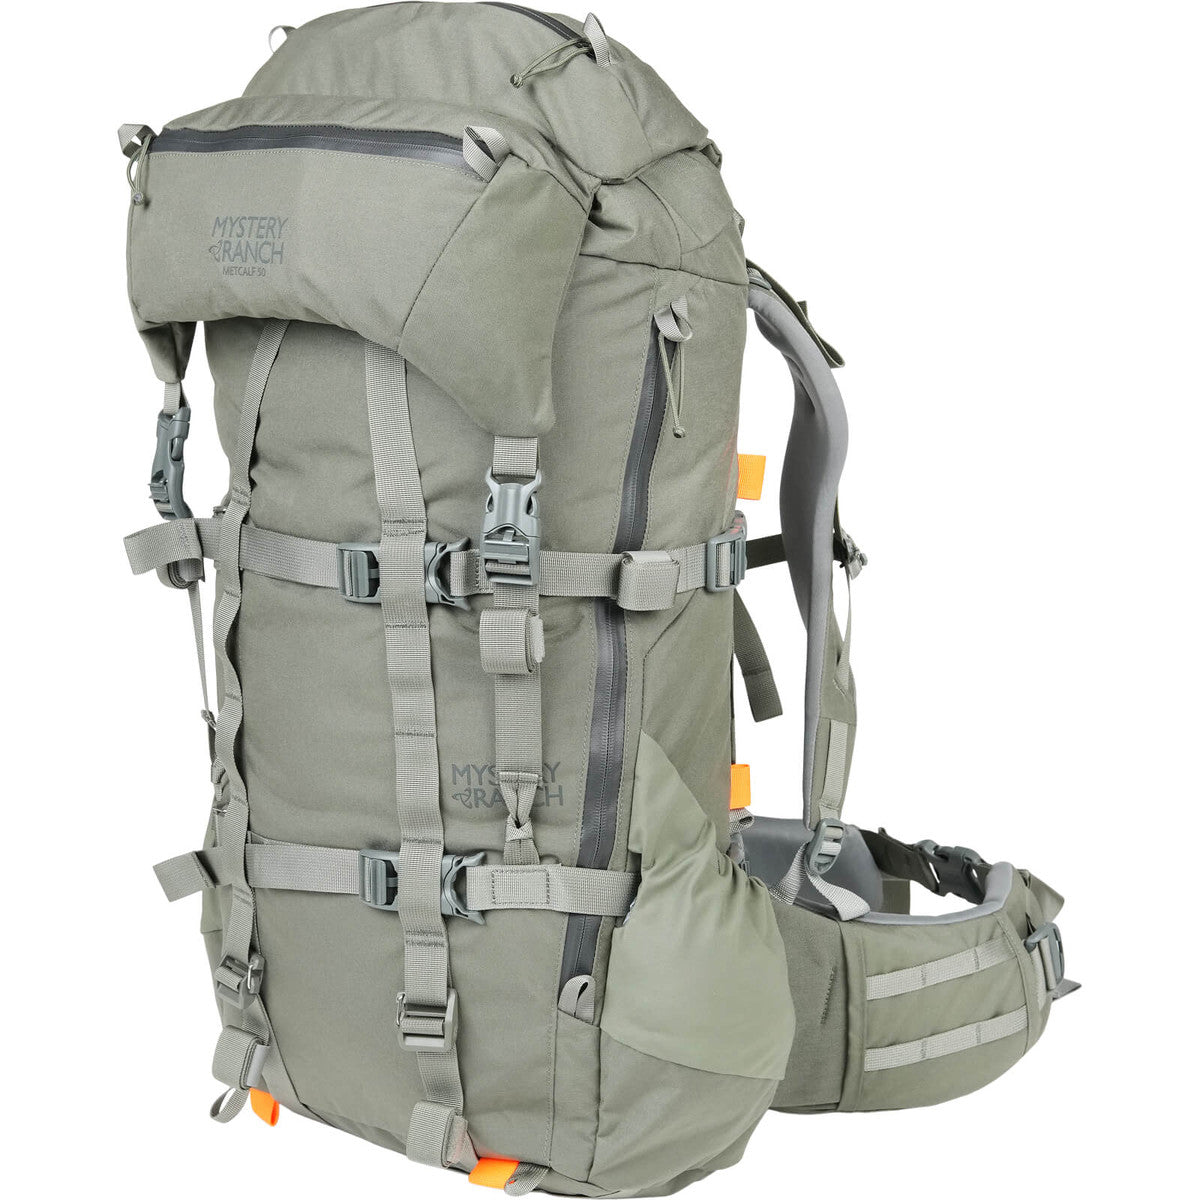 Mystery Ranch Metcalf 50 Hunting Pack Foliage